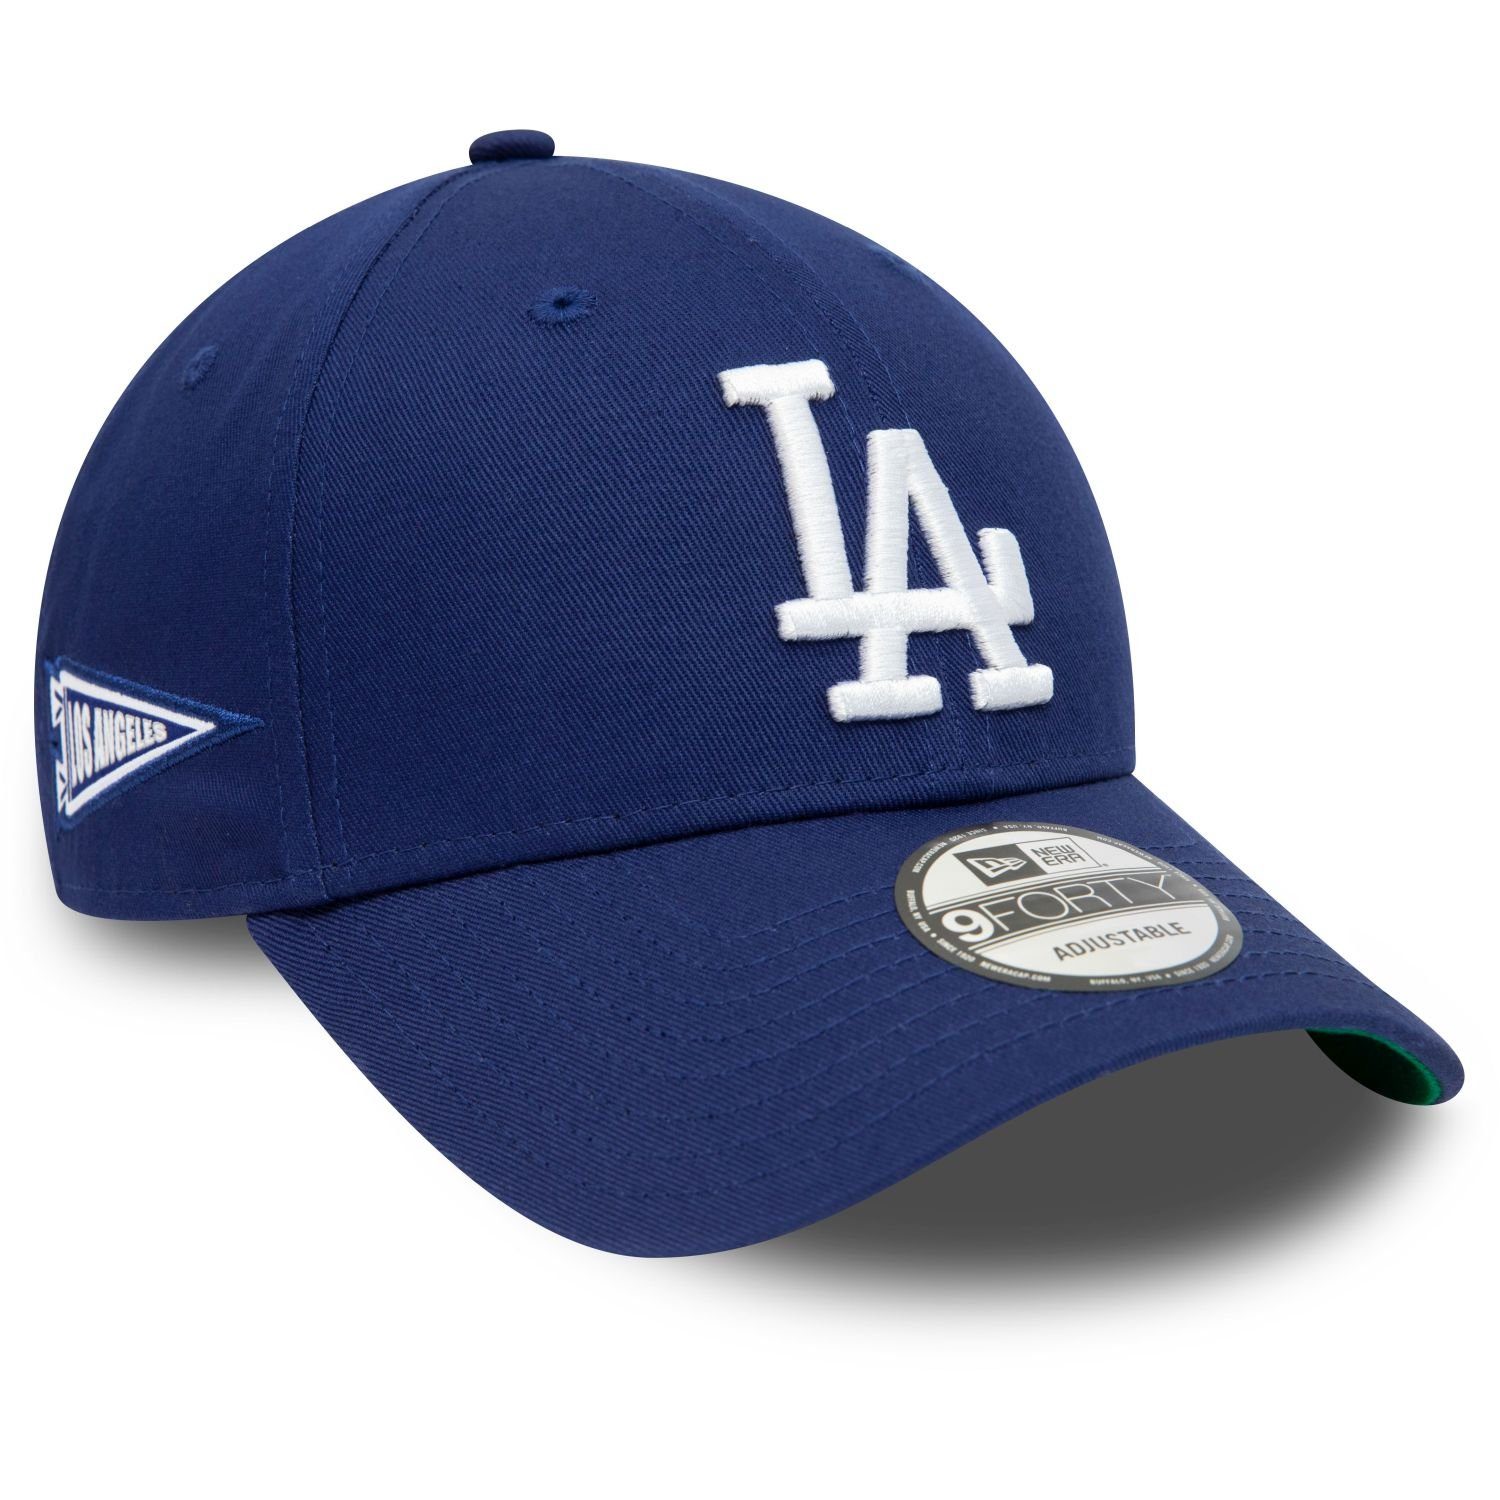 New Angeles Strapback 9Forty SIDEPATCH Dodgers Era Baseball Cap Los